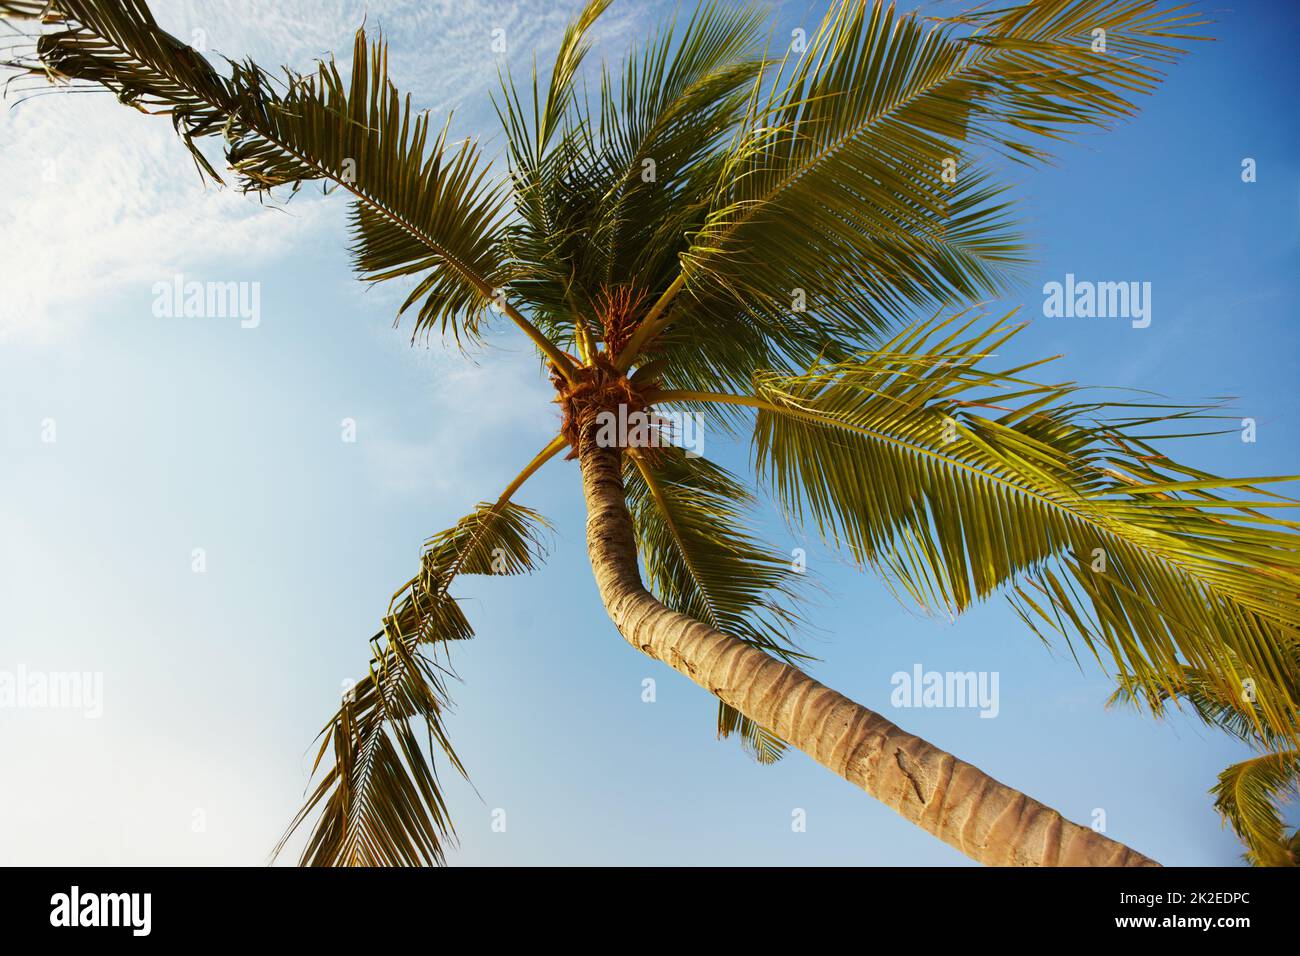 Tropical paradise. View from underneath a palm tree in the Maldives. Stock Photo